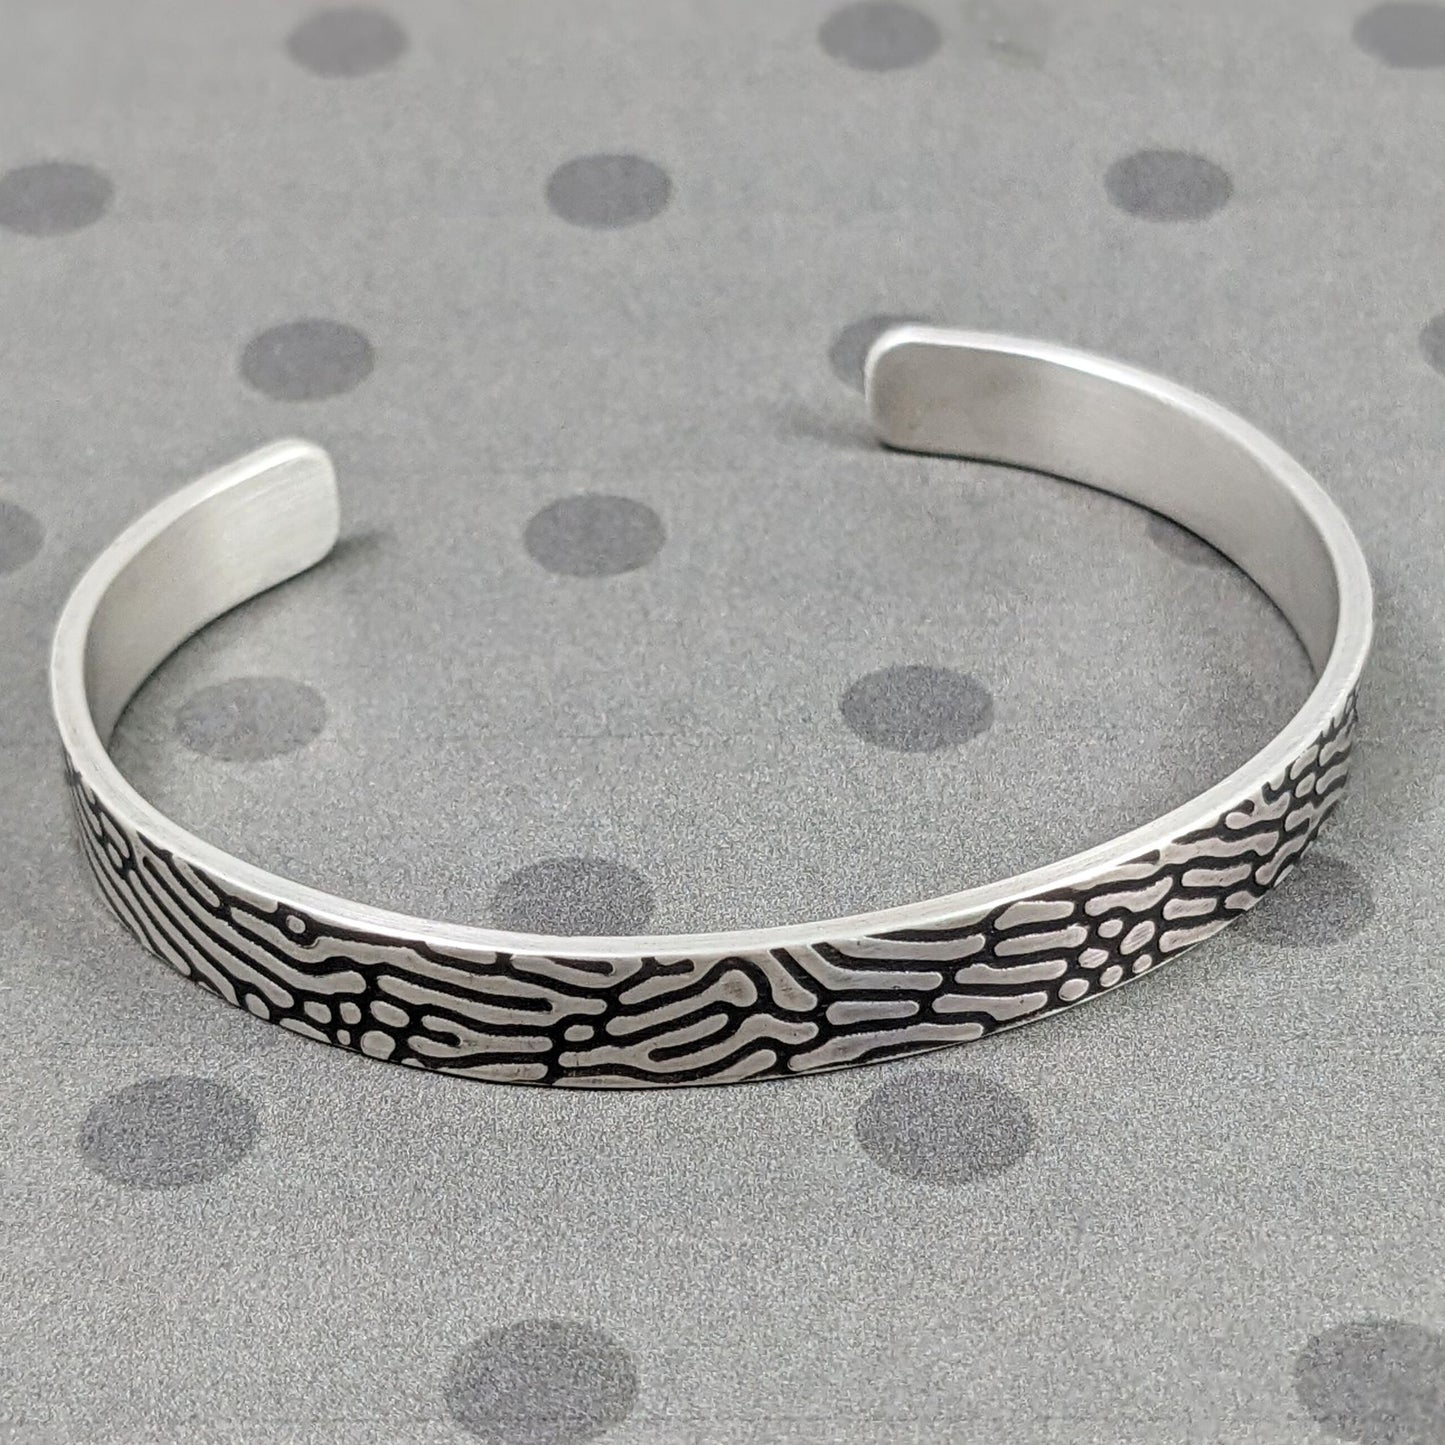 Rectangular shaped sterling silver wire cuff bracelet with an impressed design that looks like Brain Coral. The impressed design is darkened, so the coral lines are black against the silver.